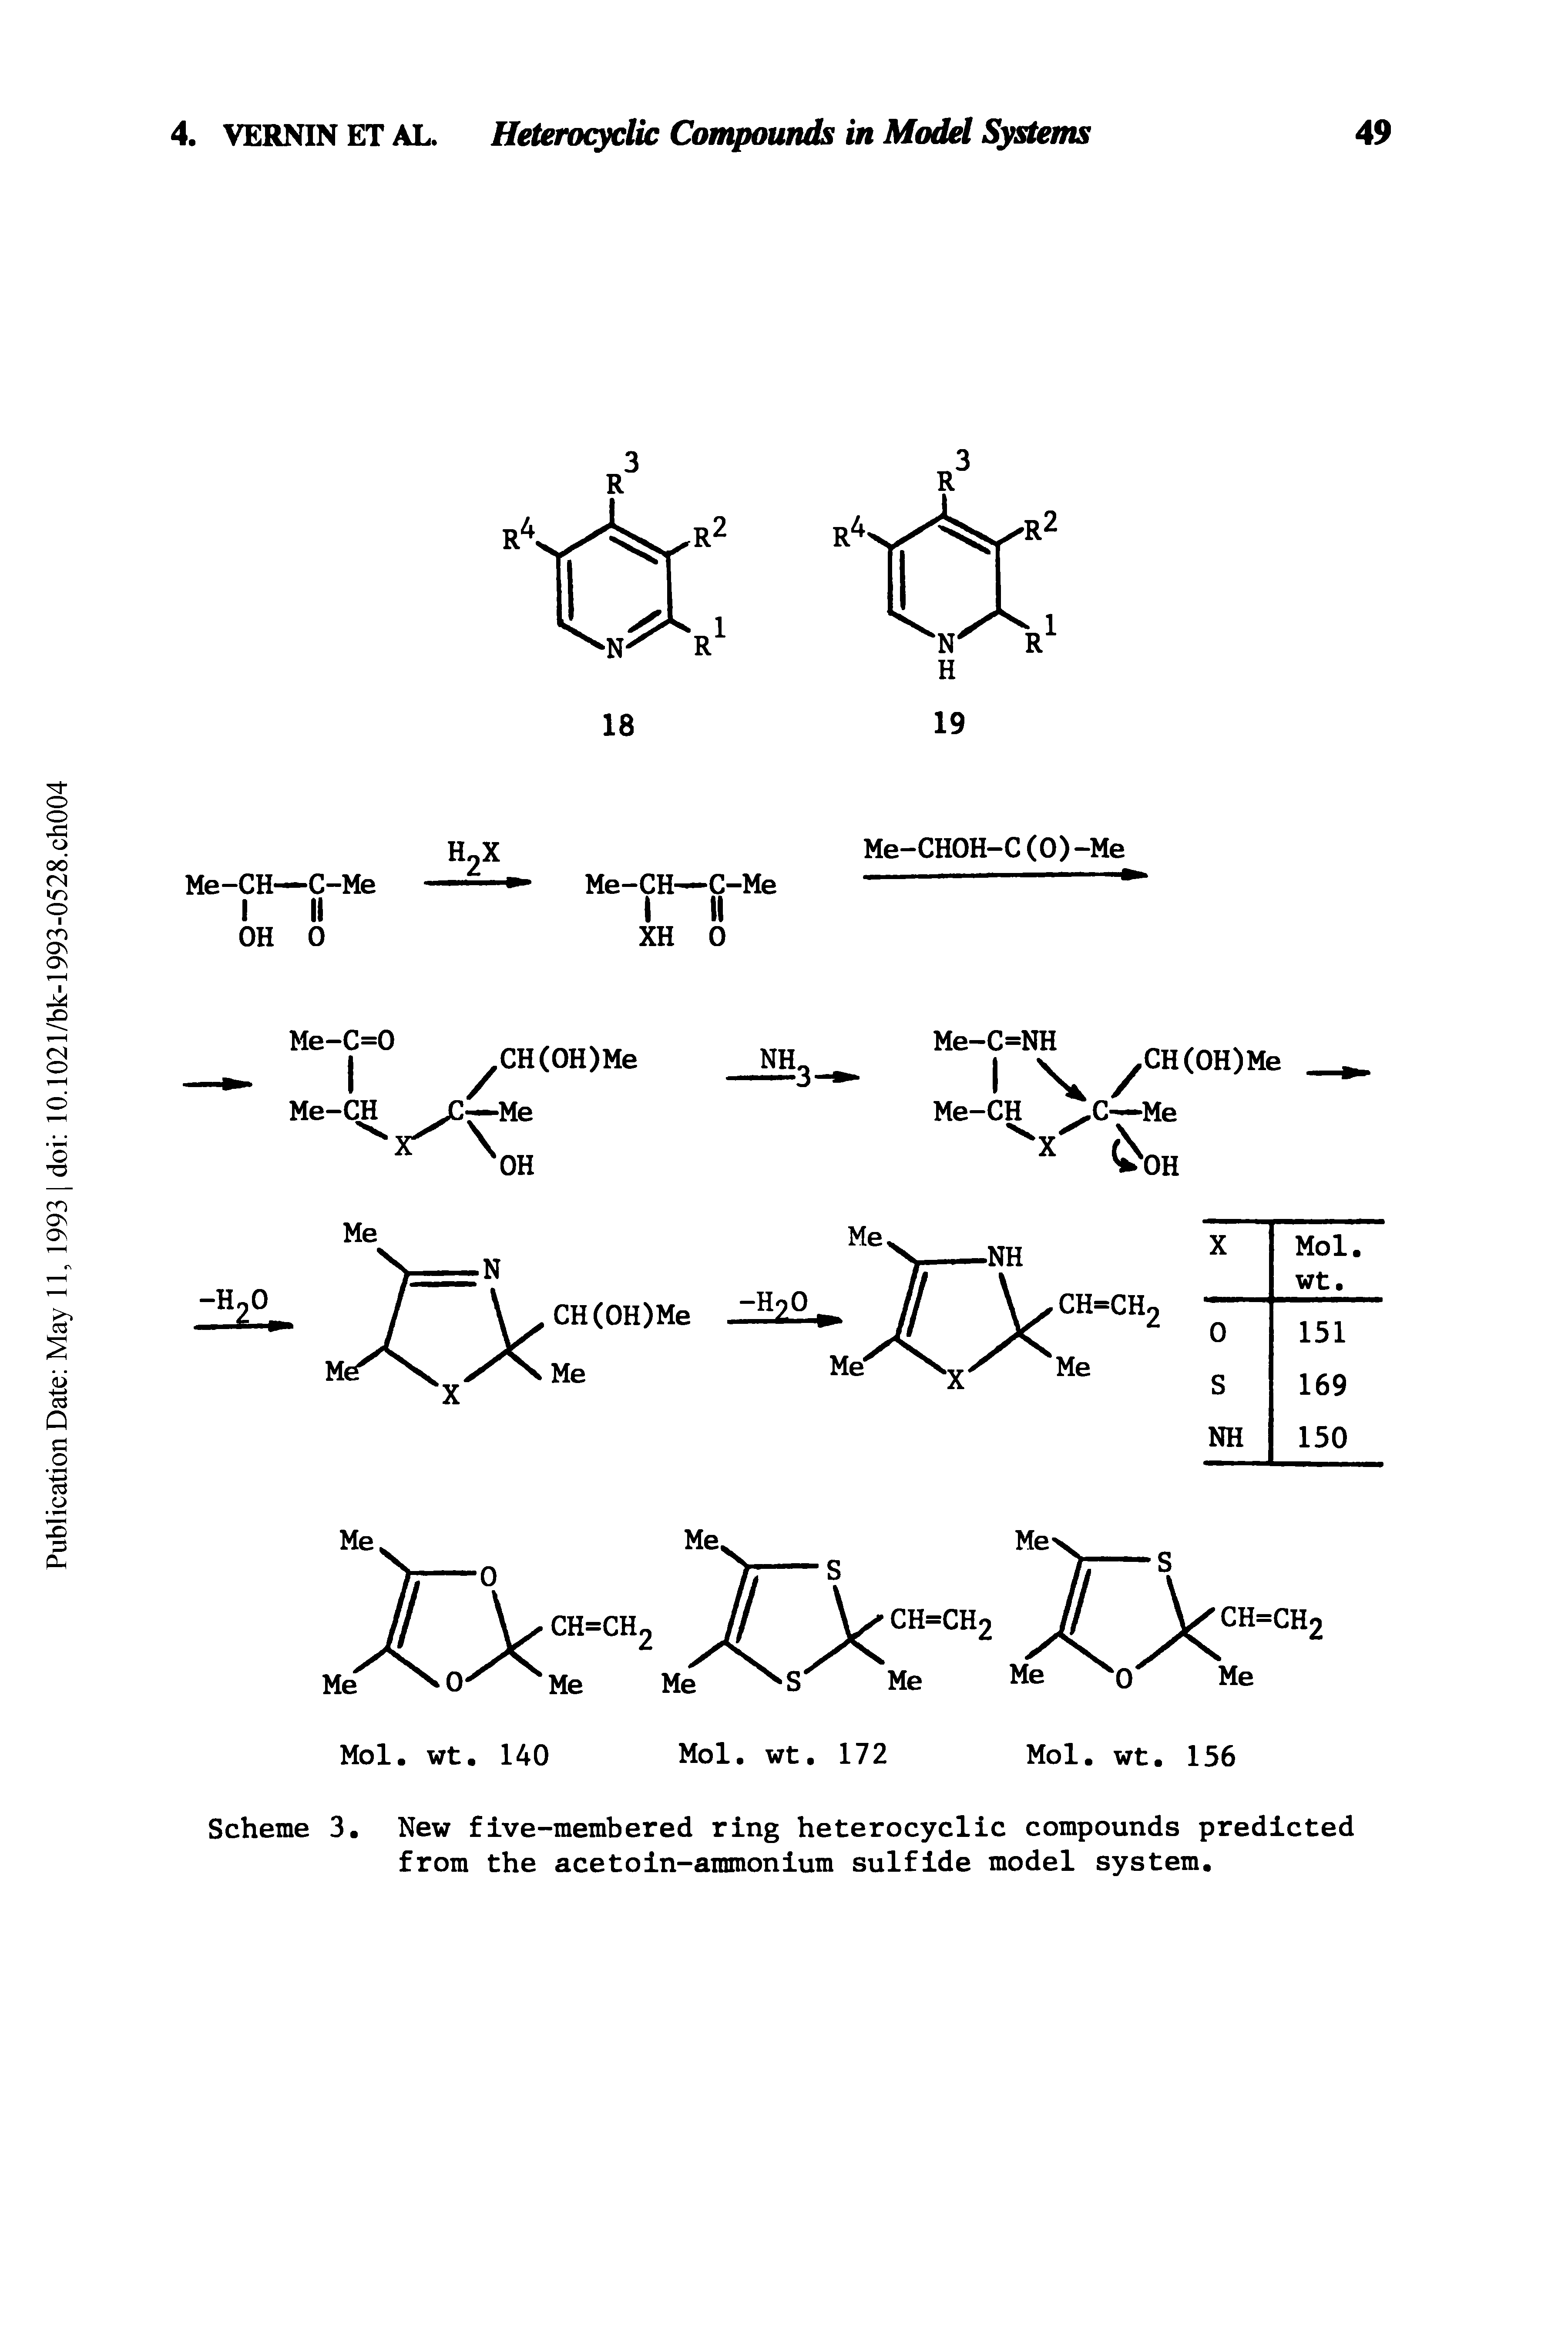 Scheme 3. New five-membered ring heterocyclic compounds predicted from the acetoin-ammonium sulfide model system.